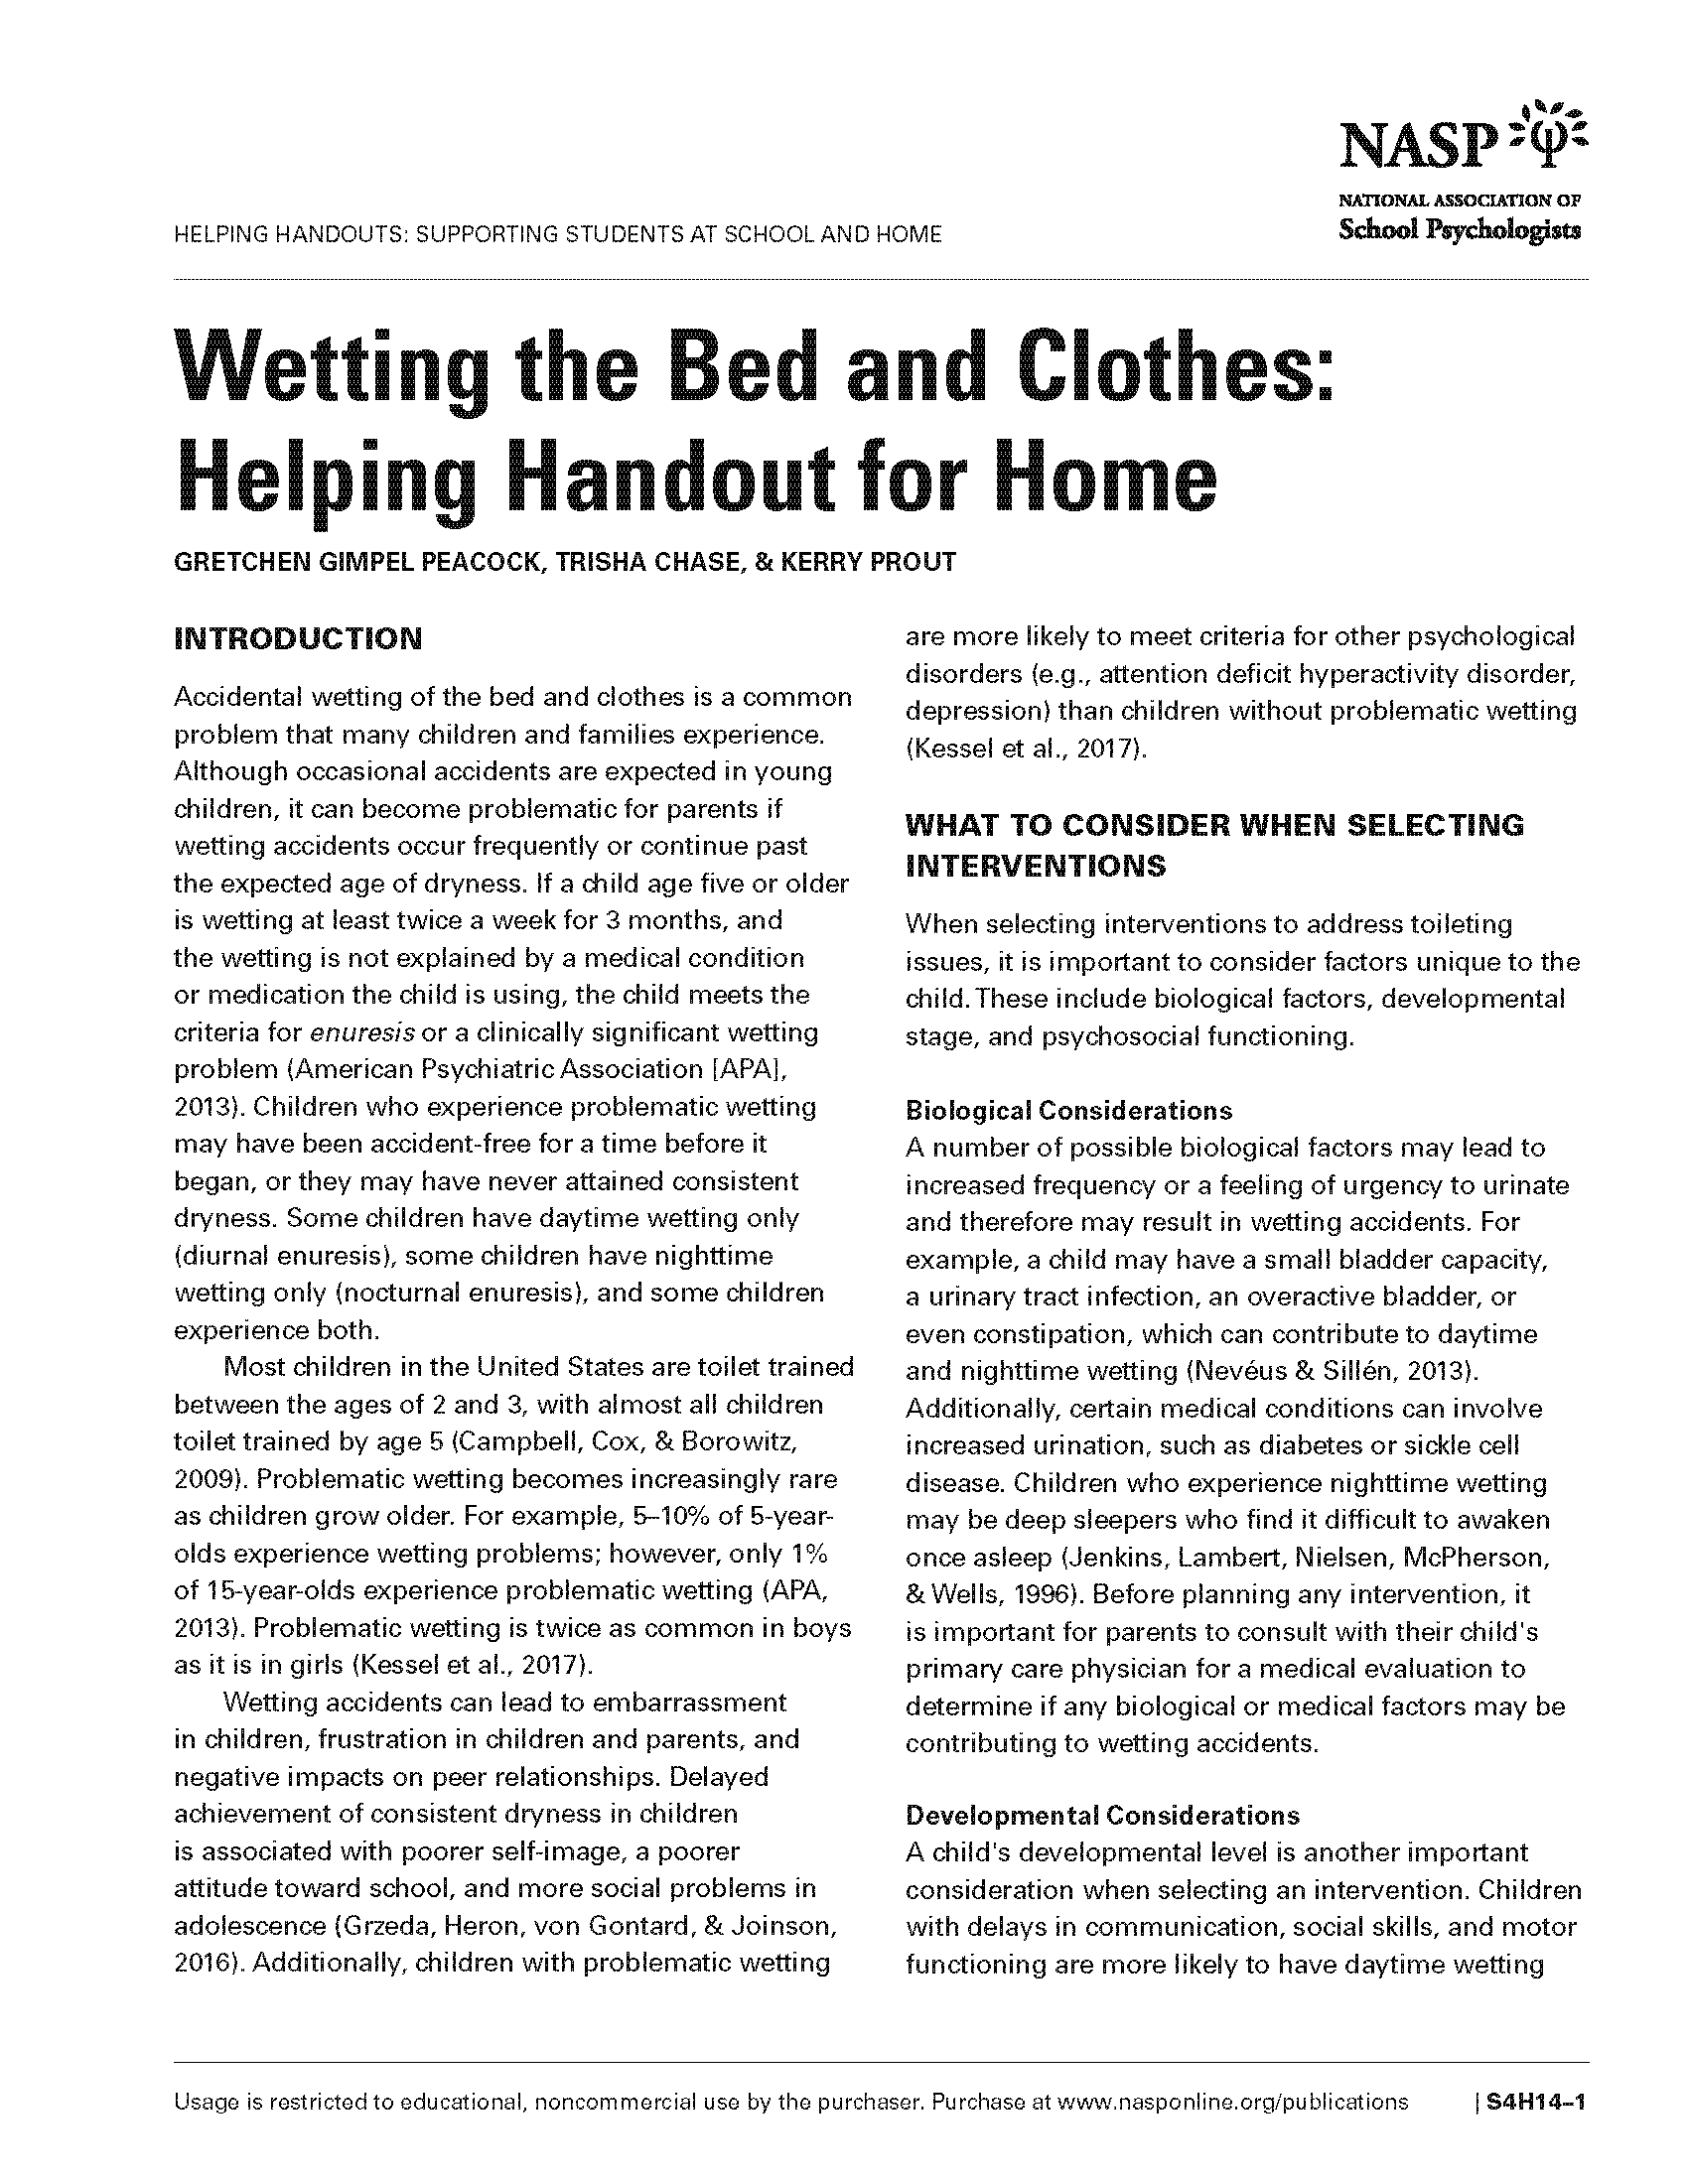 Wetting the Bed and Clothes: Helping Handout for Home